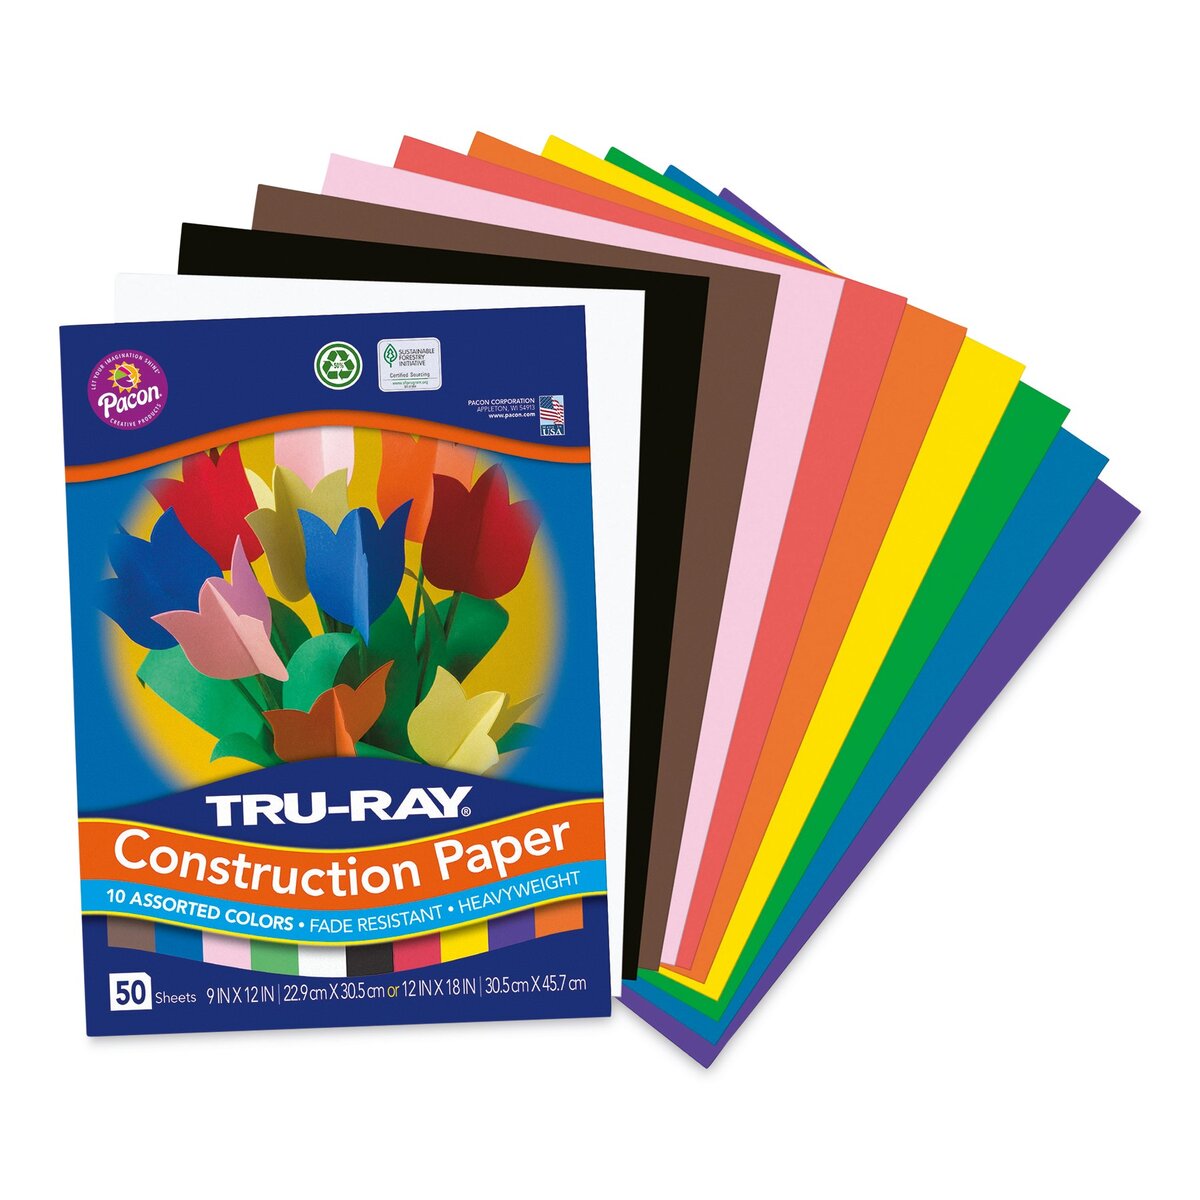 Construction Paper Black 9 inches x 12 inches 50 Sheets